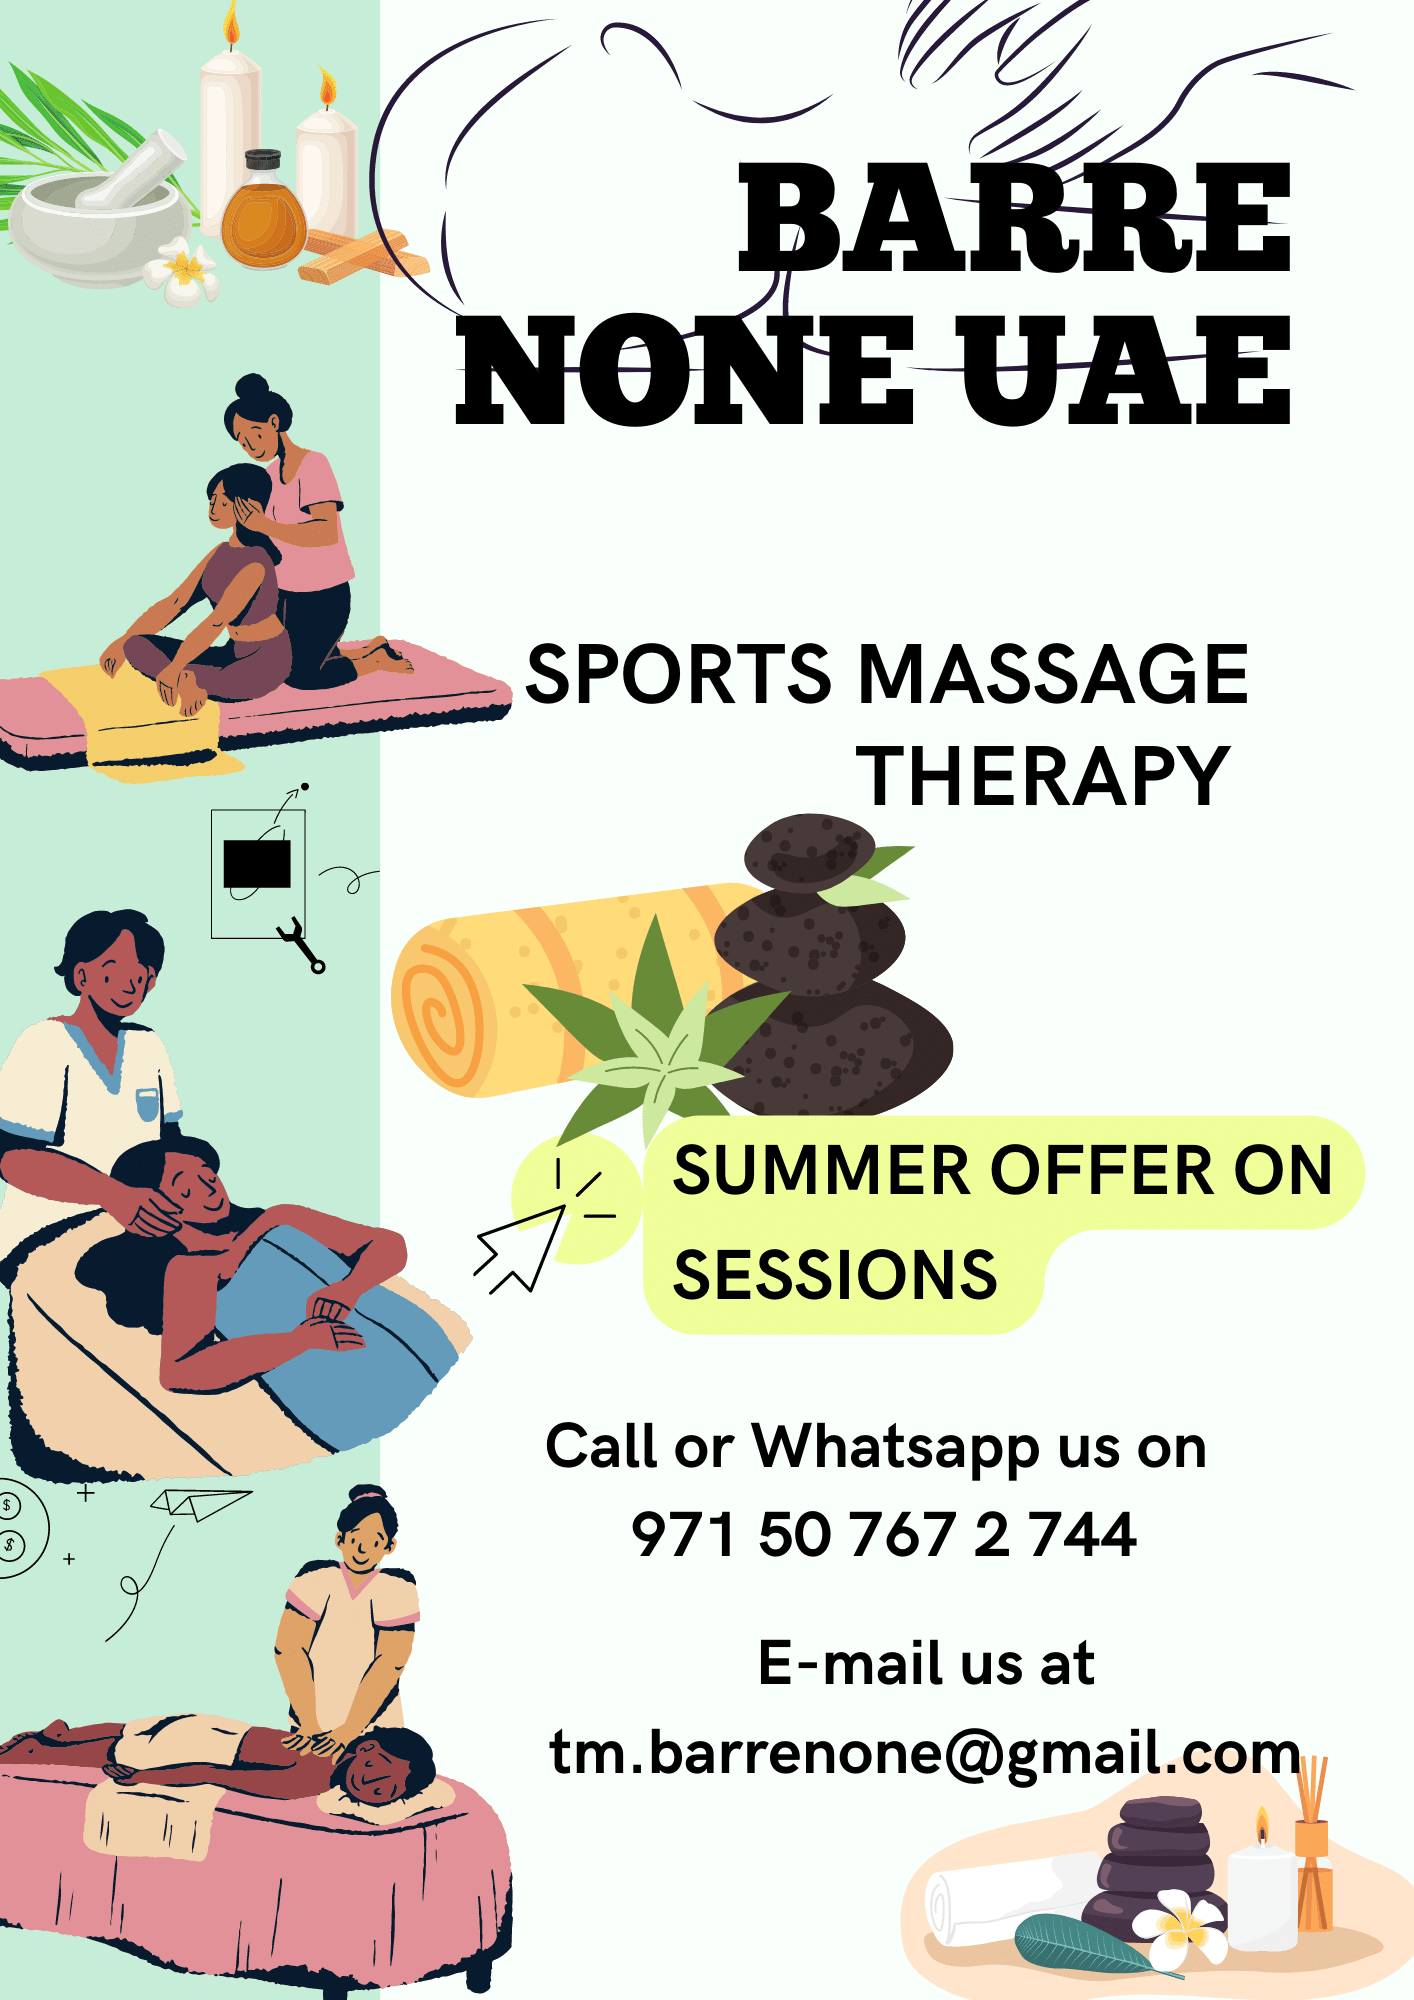 FEMALE SPORTS MASSEUSE AVAILABLE FOR HOME VISITS